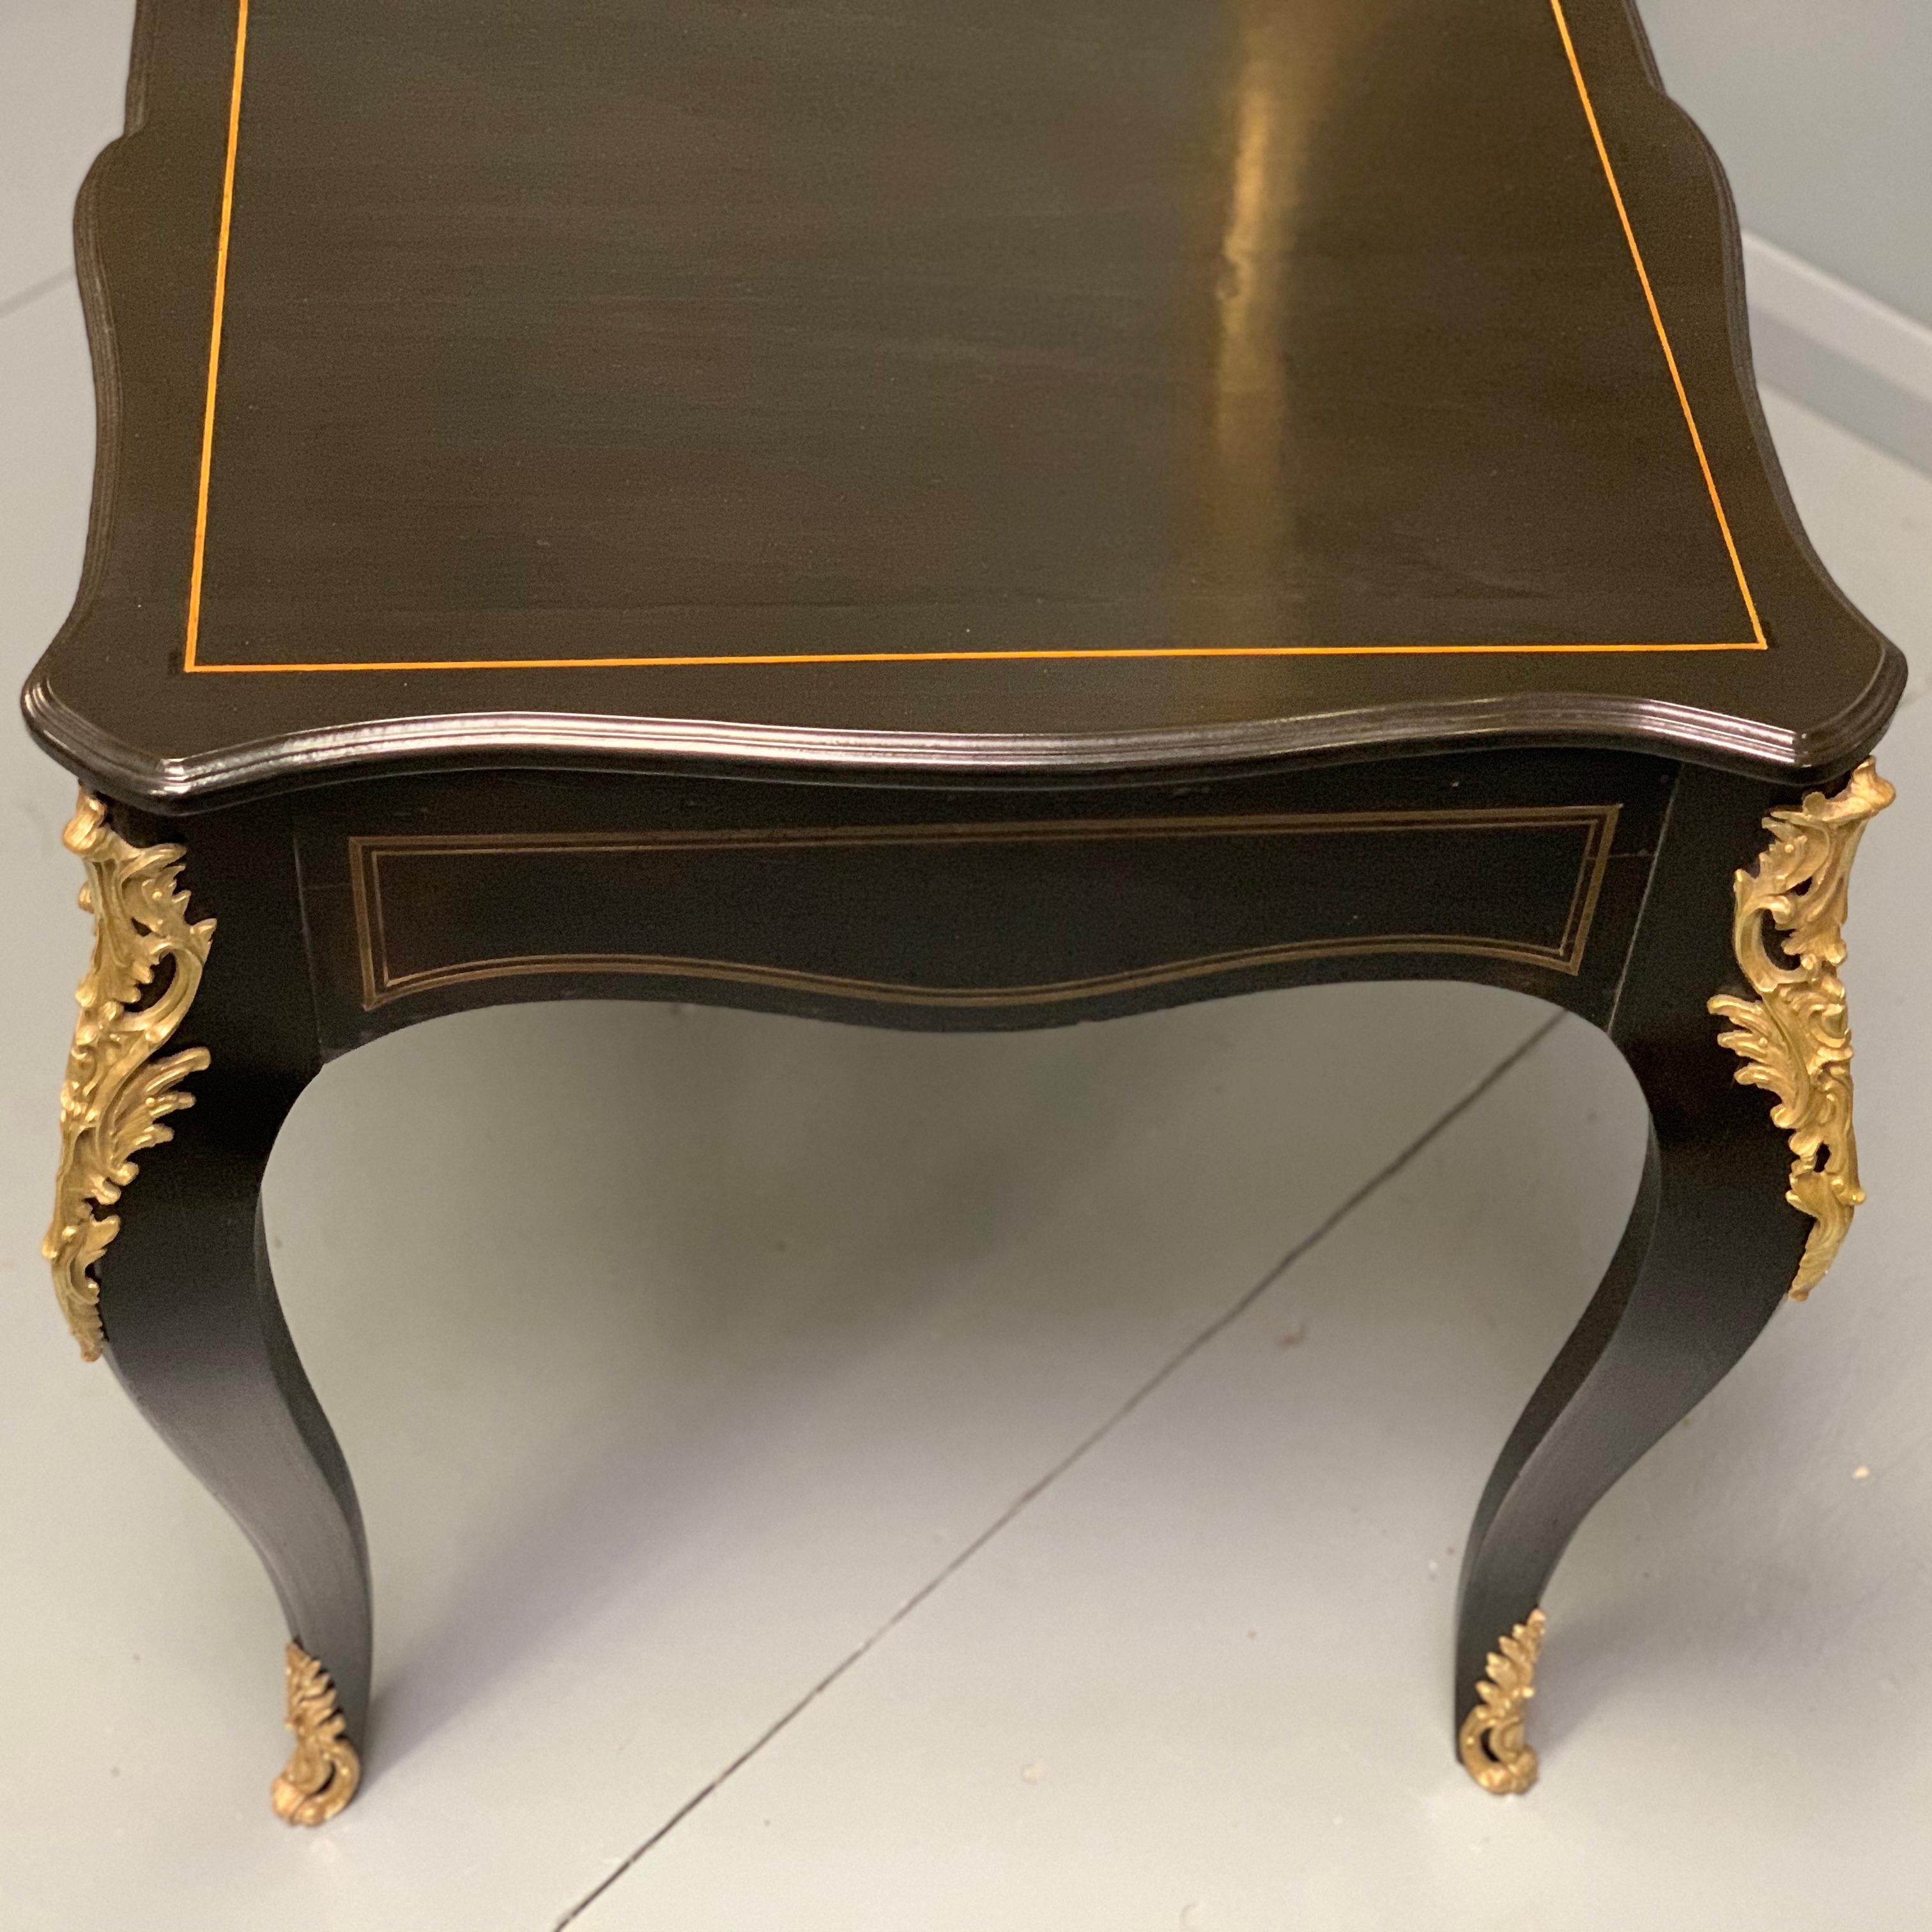 Mahogany Large Late 19th Century French Black Lacquered and Brass Bureau Plat Desk